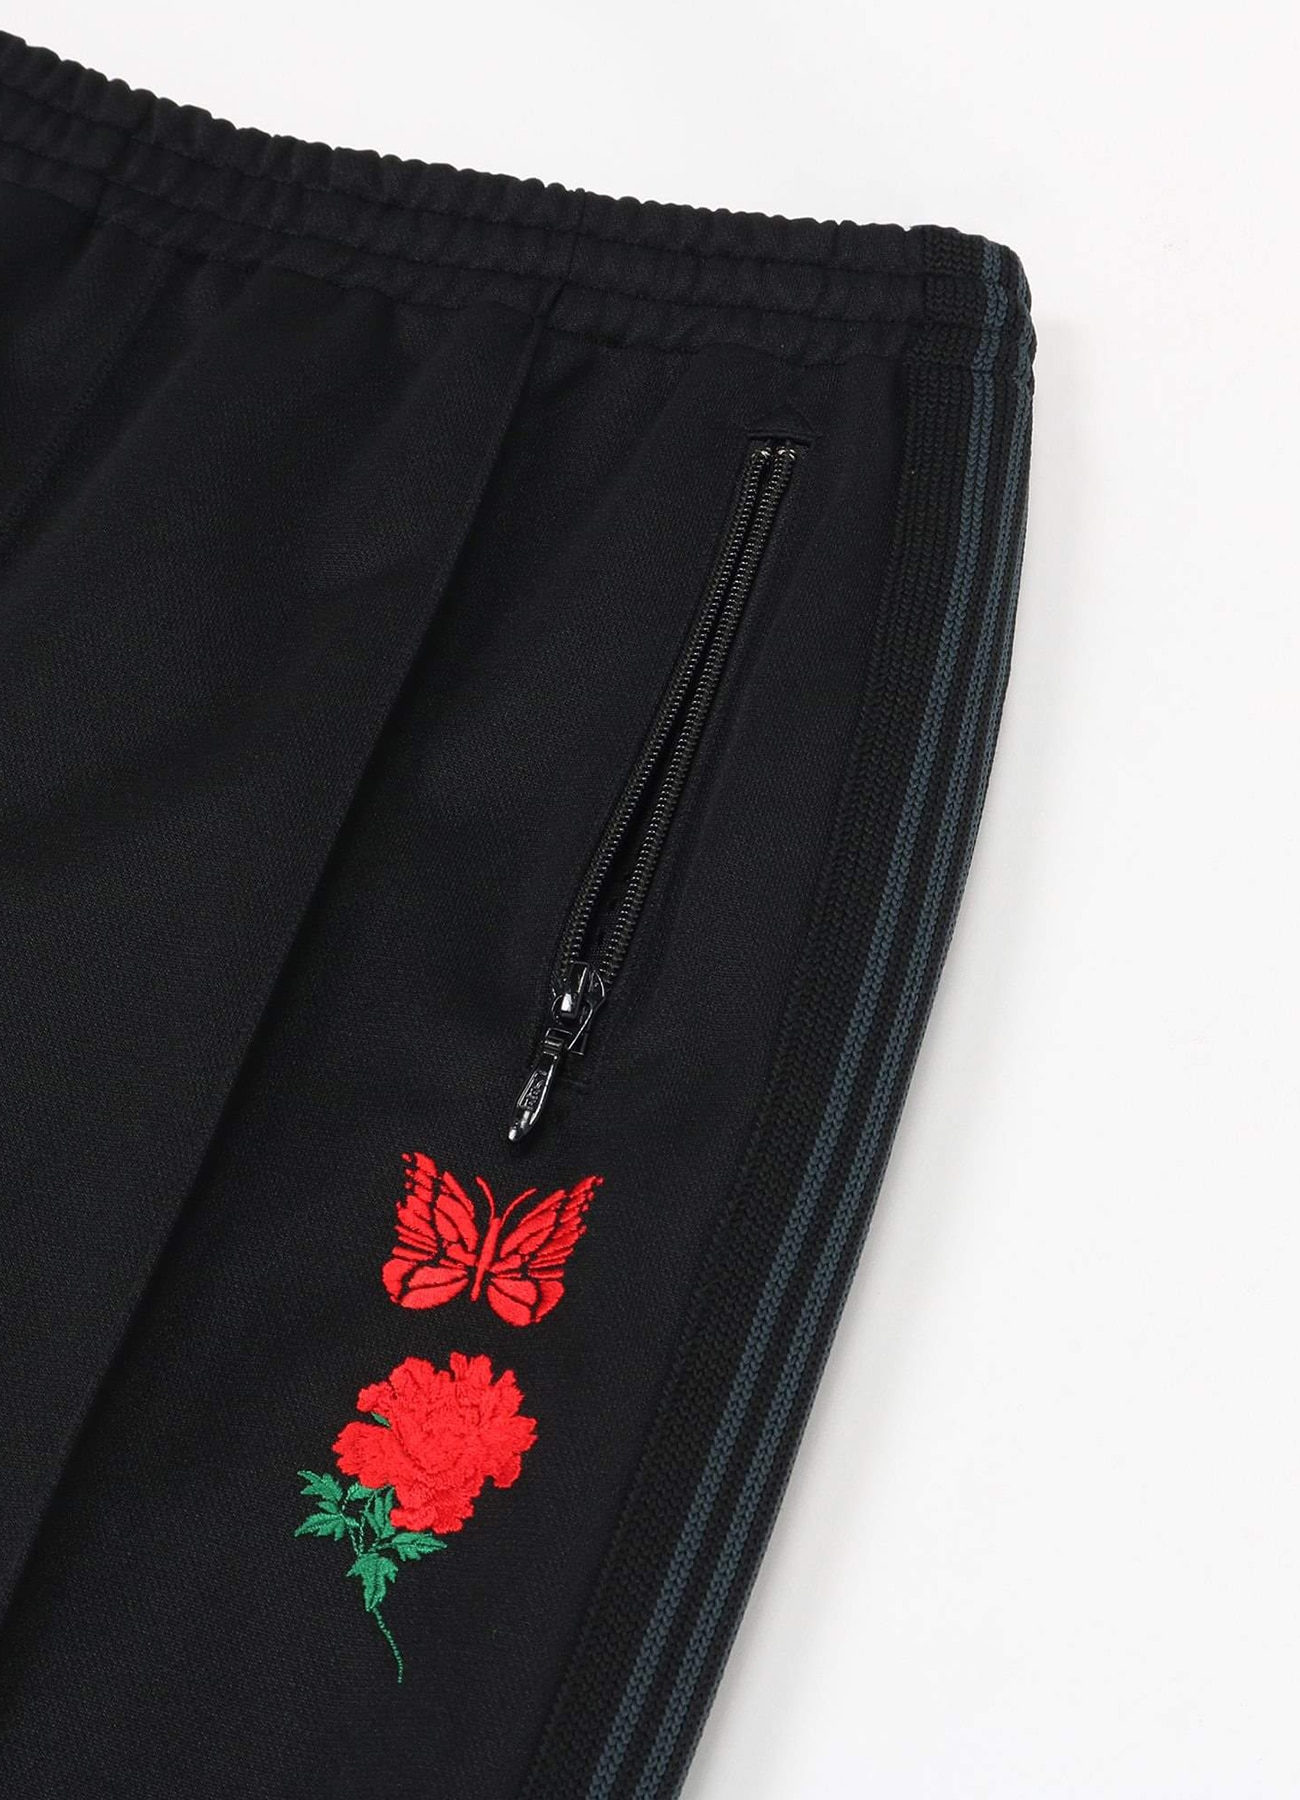 WILDSIDE × NEEDLES Track Pant(XS CHARCOALxBLACK): NEPENTHES